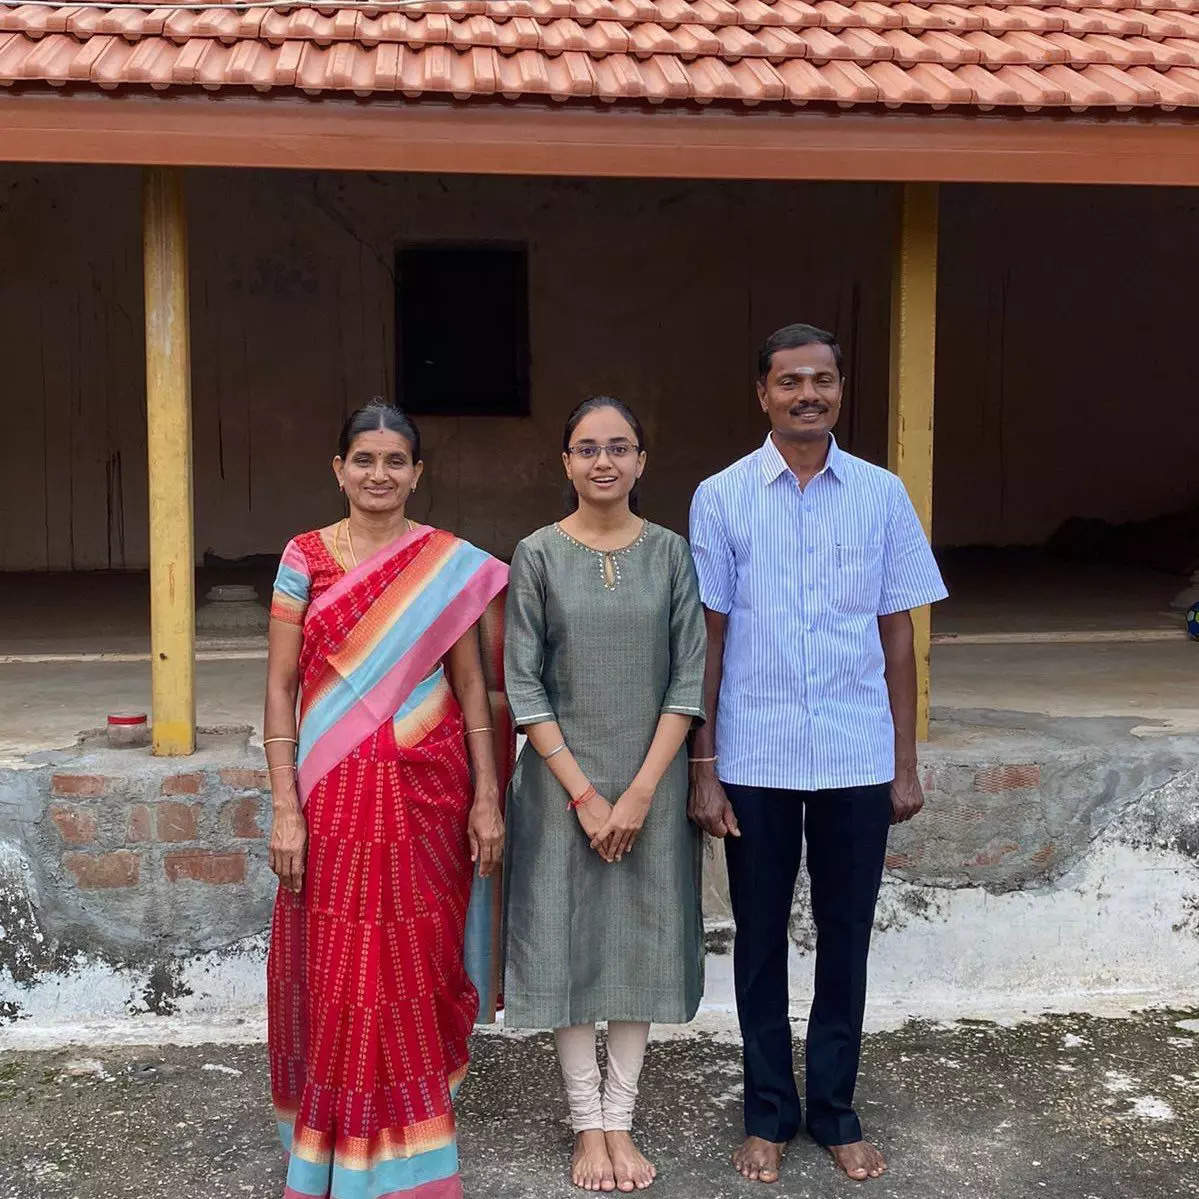 Tamil Nadu farmer’s daughter gets scholarship of Rs3 crore from University of Chicago